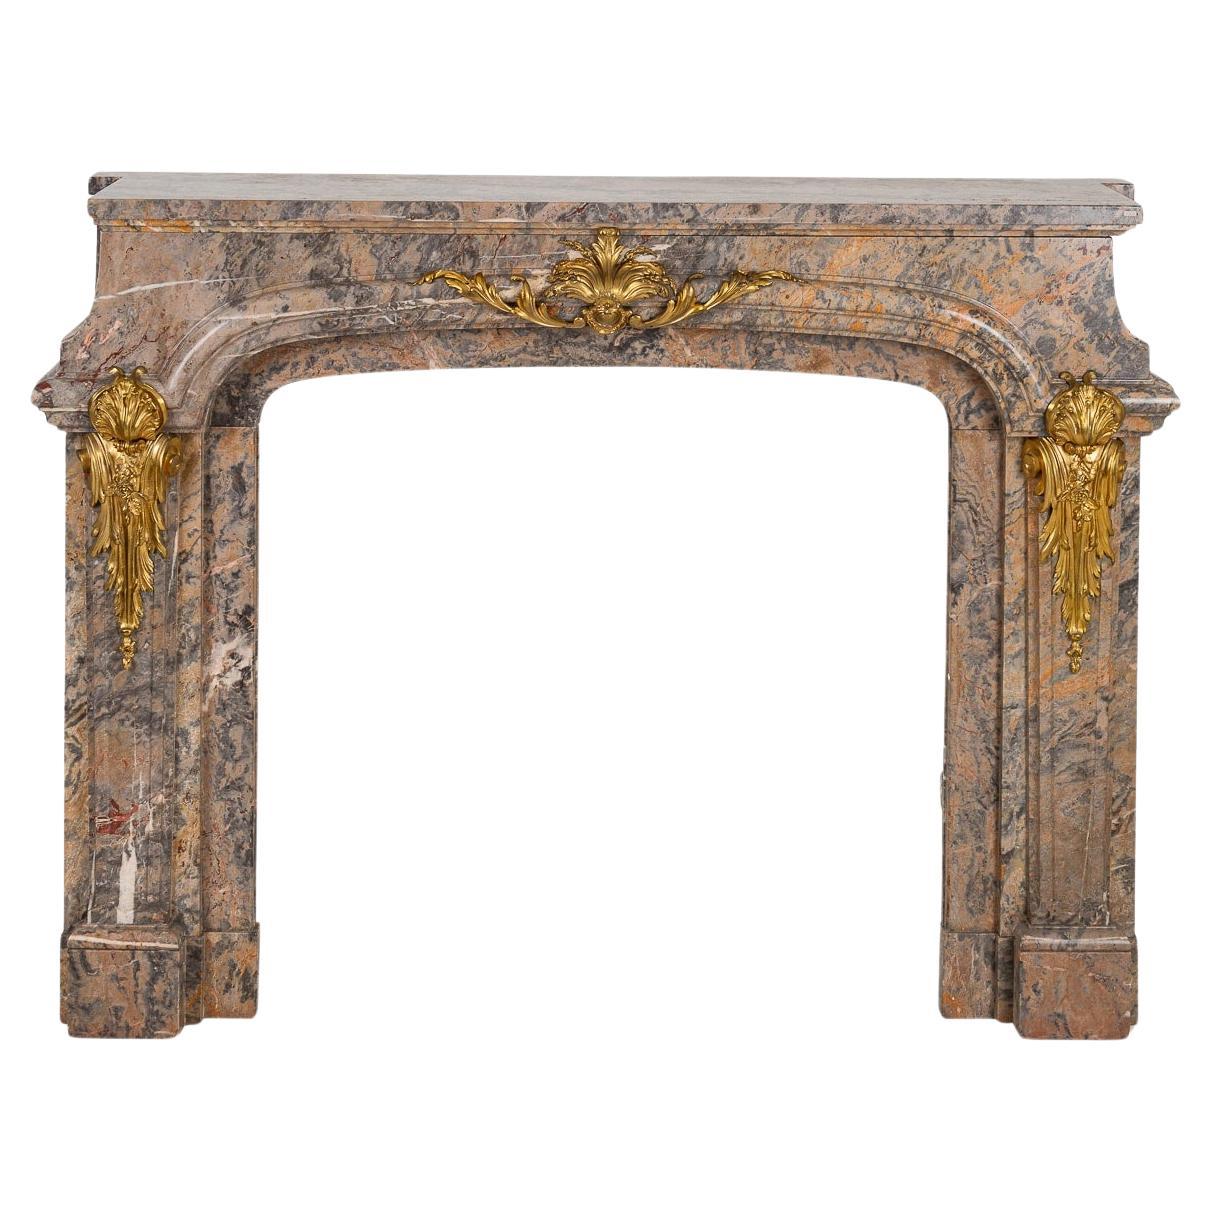 Antique 19th Century French Ormolu Mounted Caravaggio Marble Fireplace c.1880